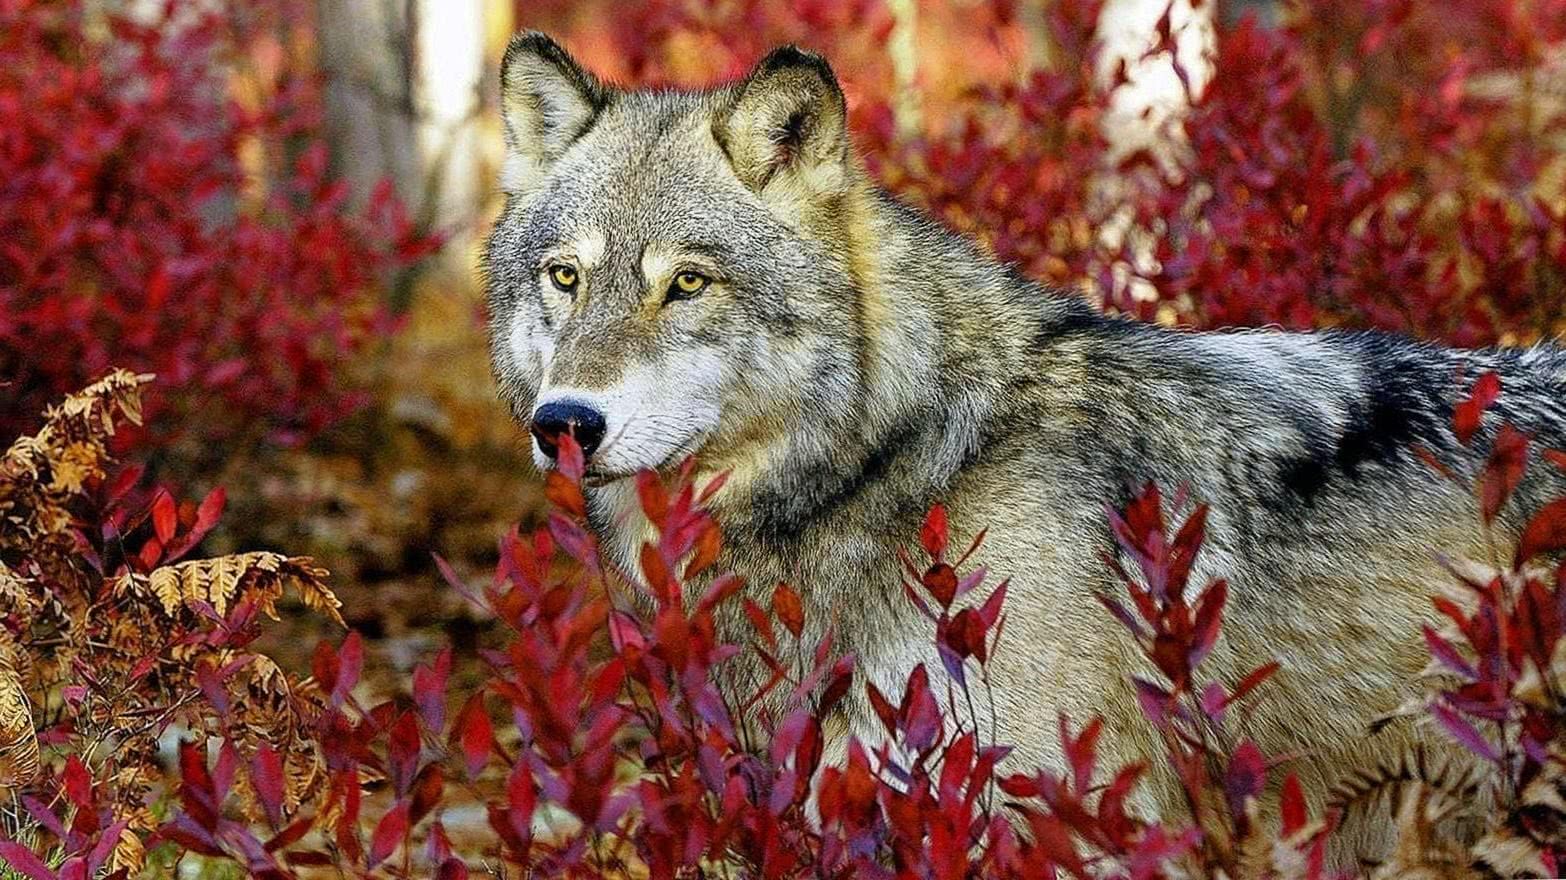 HD Wallpapers Of Wolfs